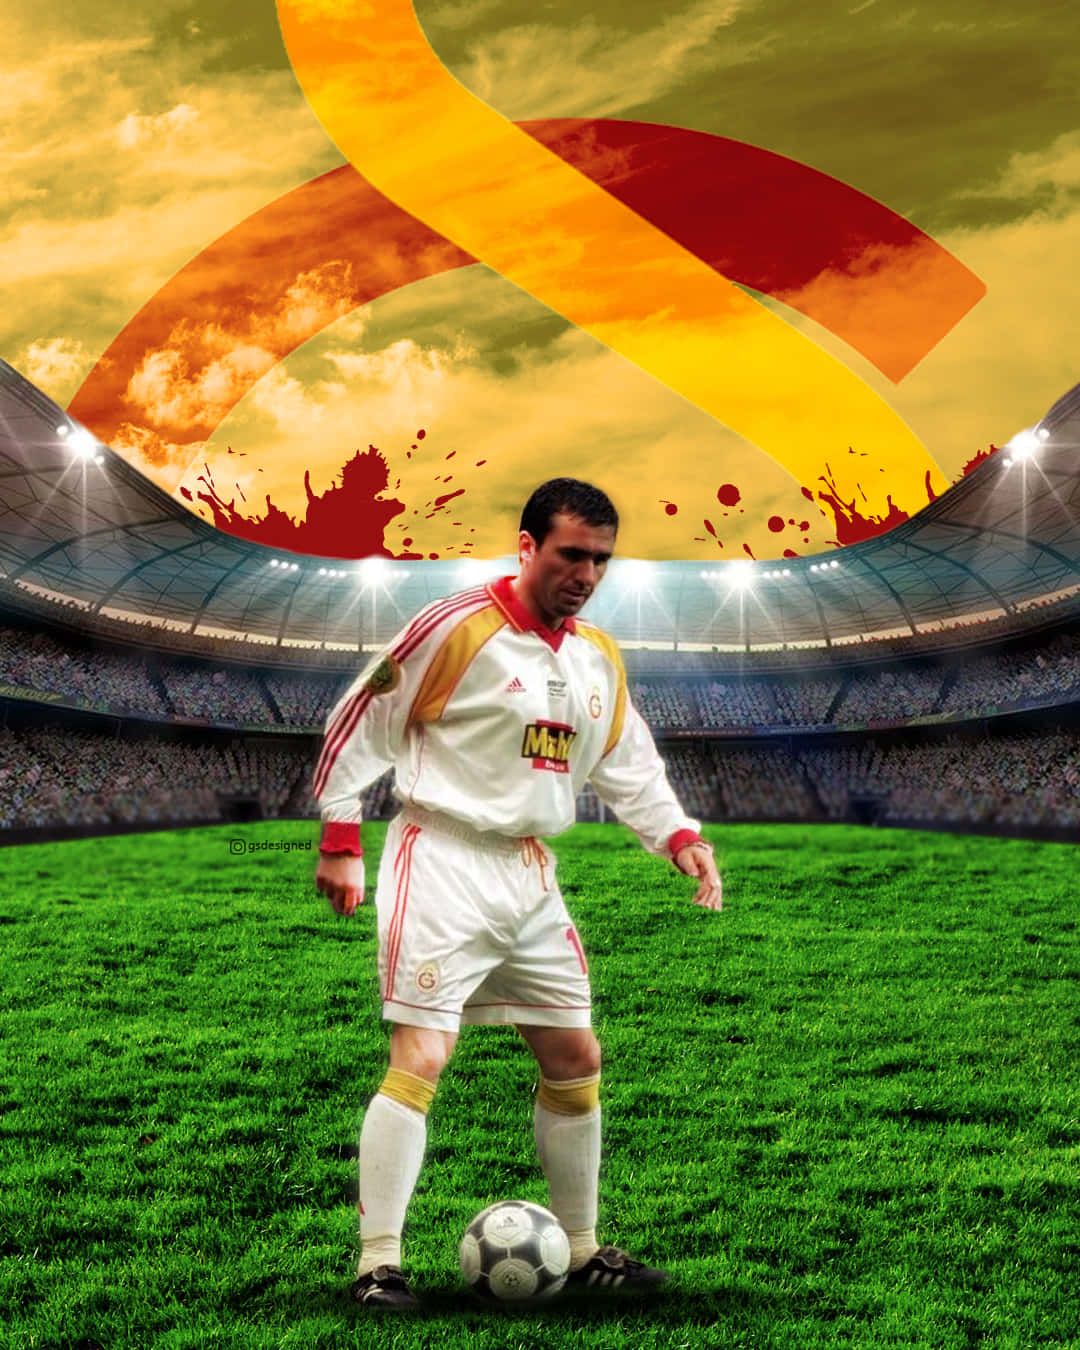 (this Could Be Used As A Potential Wallpaper With An Image Of Gheorghe Hagi In A Galatasaray Jersey.) Wallpaper